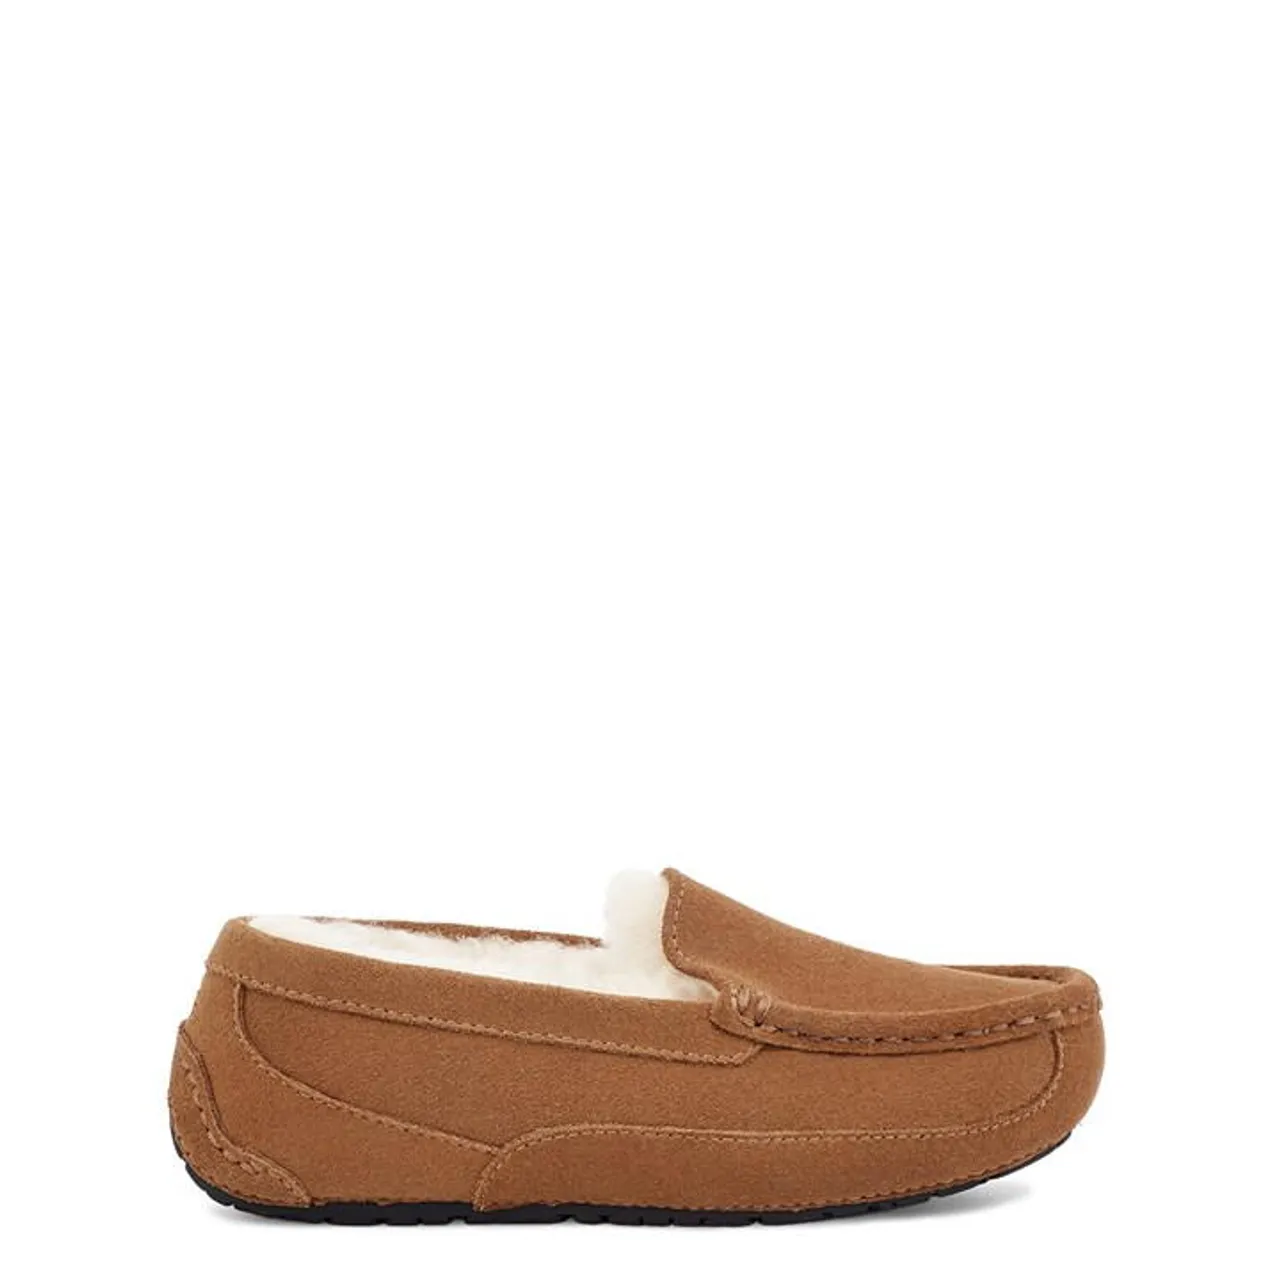 Ugg Ascot Suede Slippers - Brown